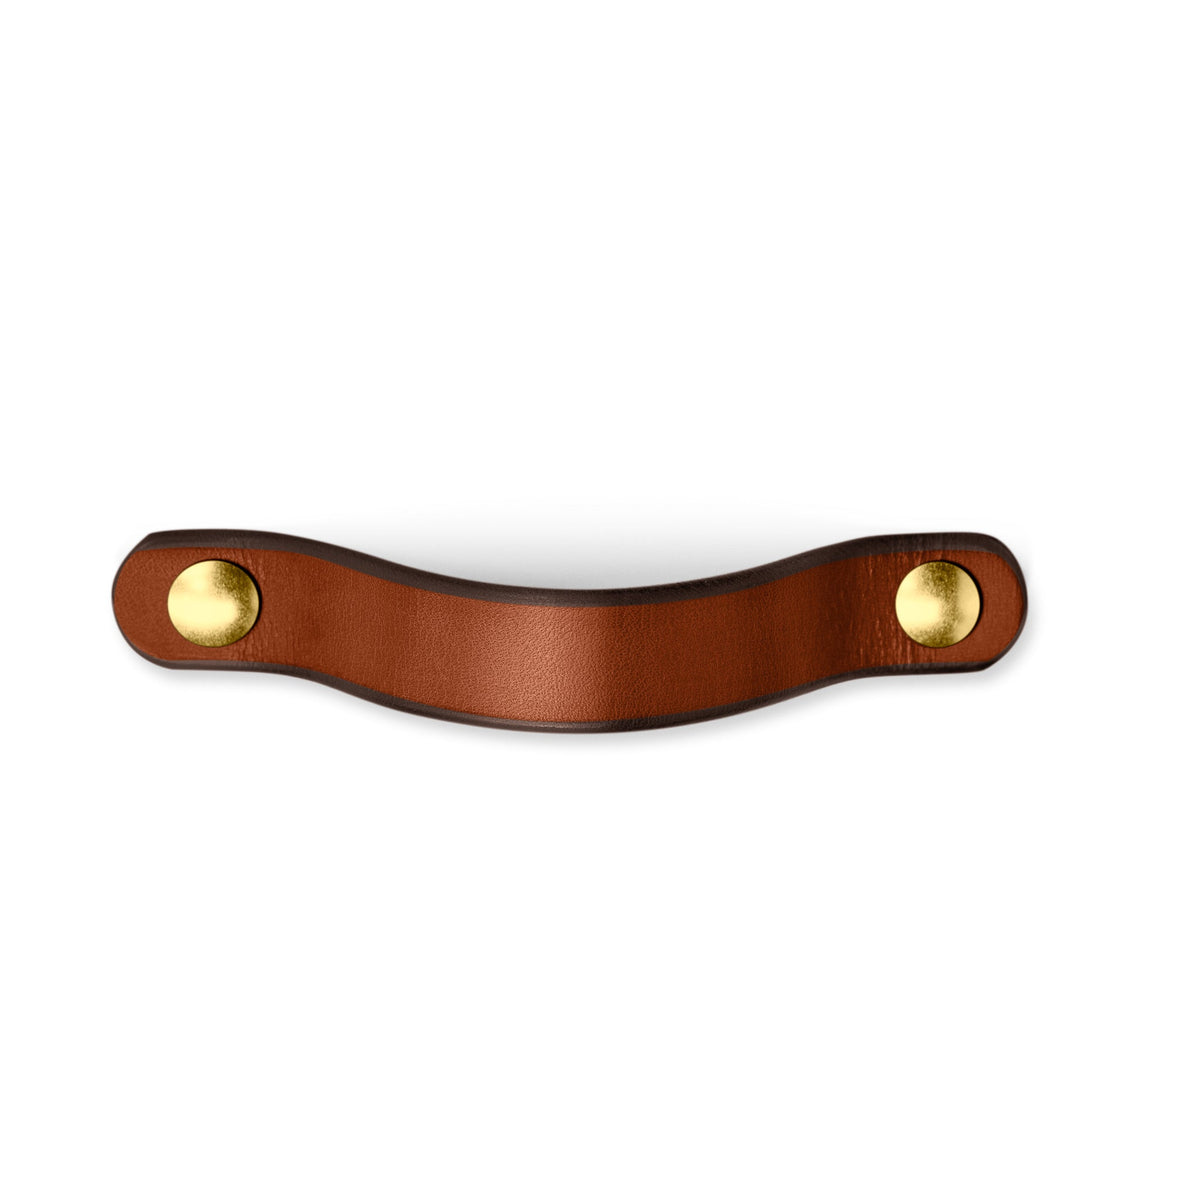 Walnut Studiolo AS-IS AS-IS SALE Leather Handle - The Flanders - 3 Sizes 1 / Nickel Brass or Black (Specify in Notes)